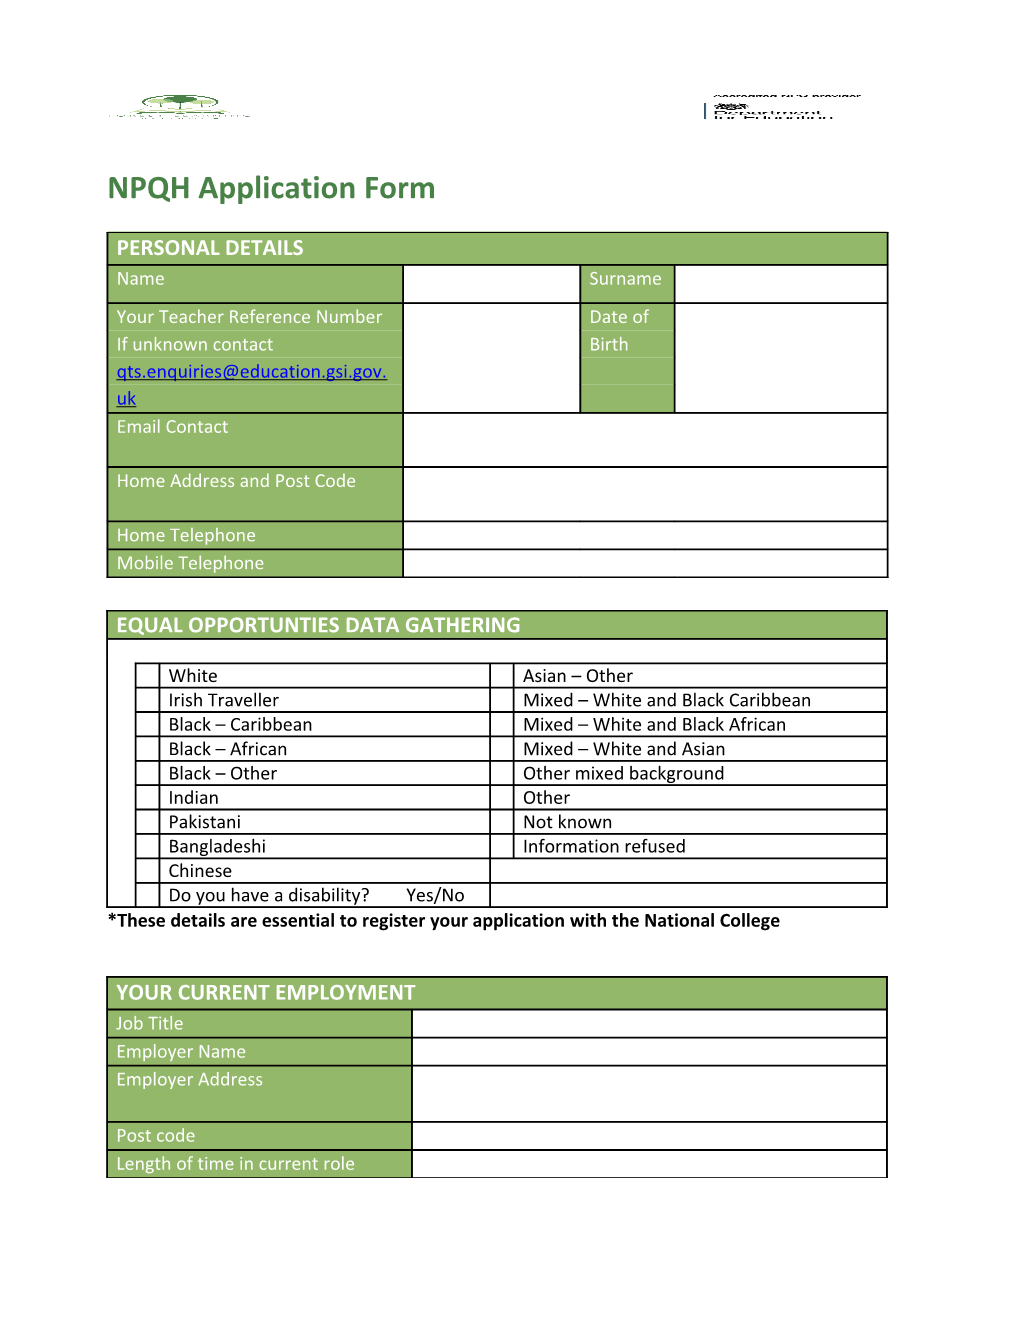 *These Details Are Essential to Register Your Application with the National College